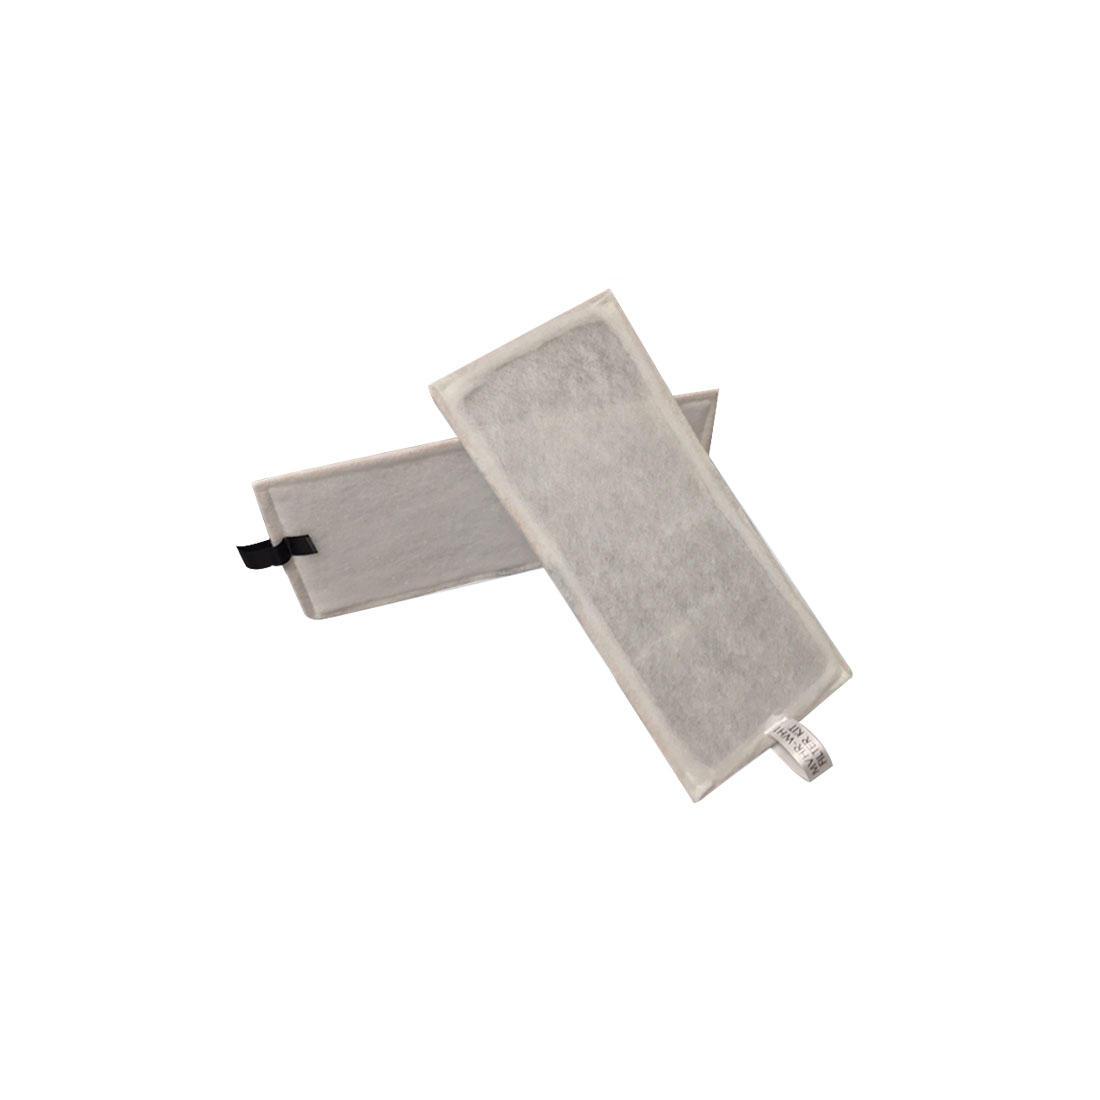 Replacement 2 x G4 Filters for Nuaire ECO2 Heat Recovery Unit